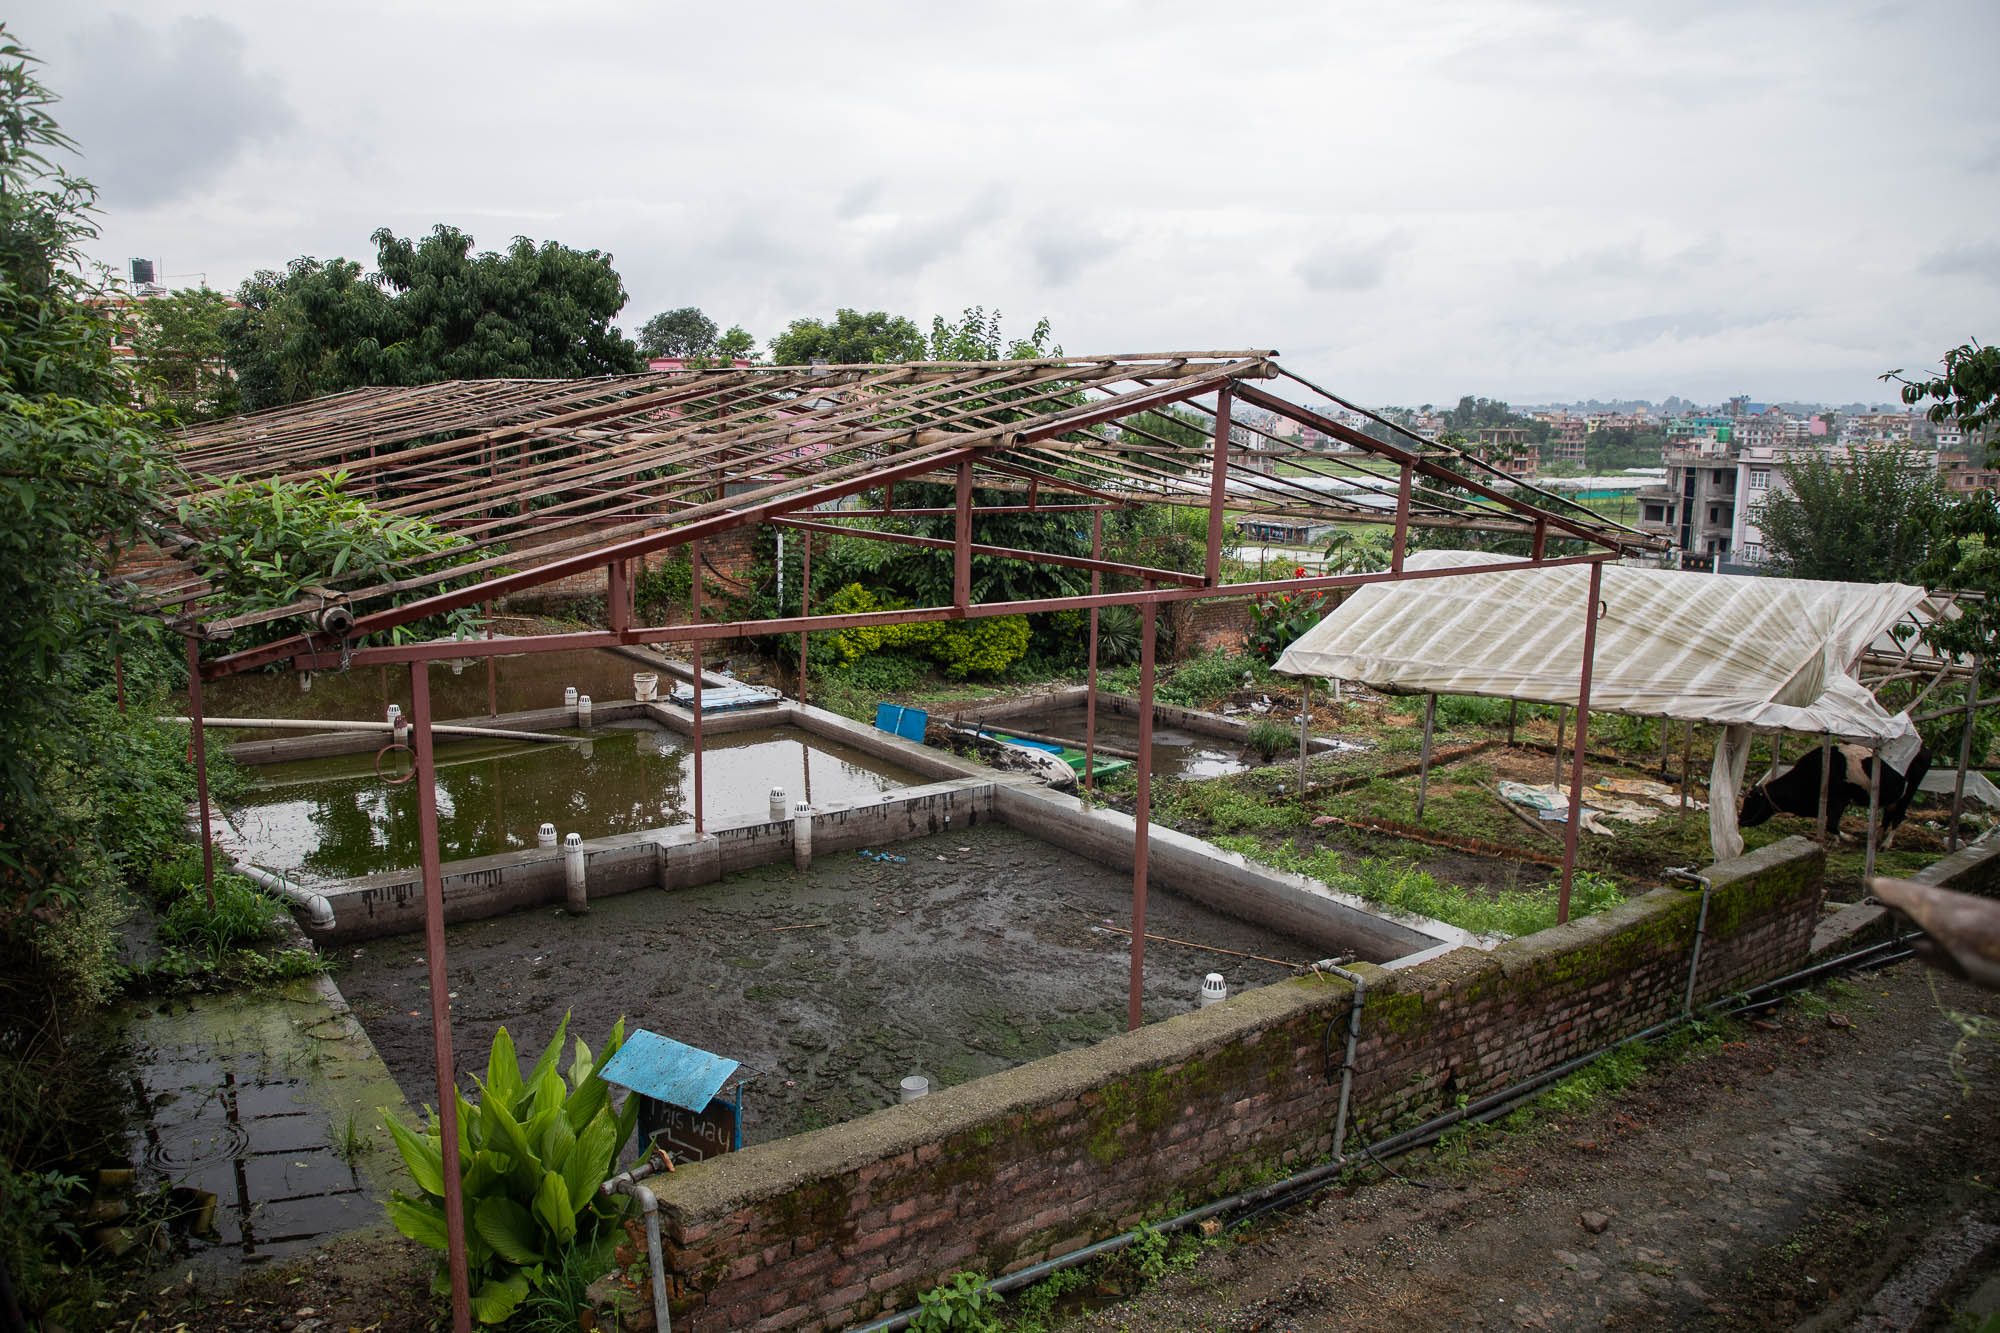 A fecal waste treatment plant in Lubhu once heralded as a game-changer is seen in a dilapidated state due to a lack of funds for maintenance and upkeep. (Image: Nishant Singh Gurung / Aawaaj News) 